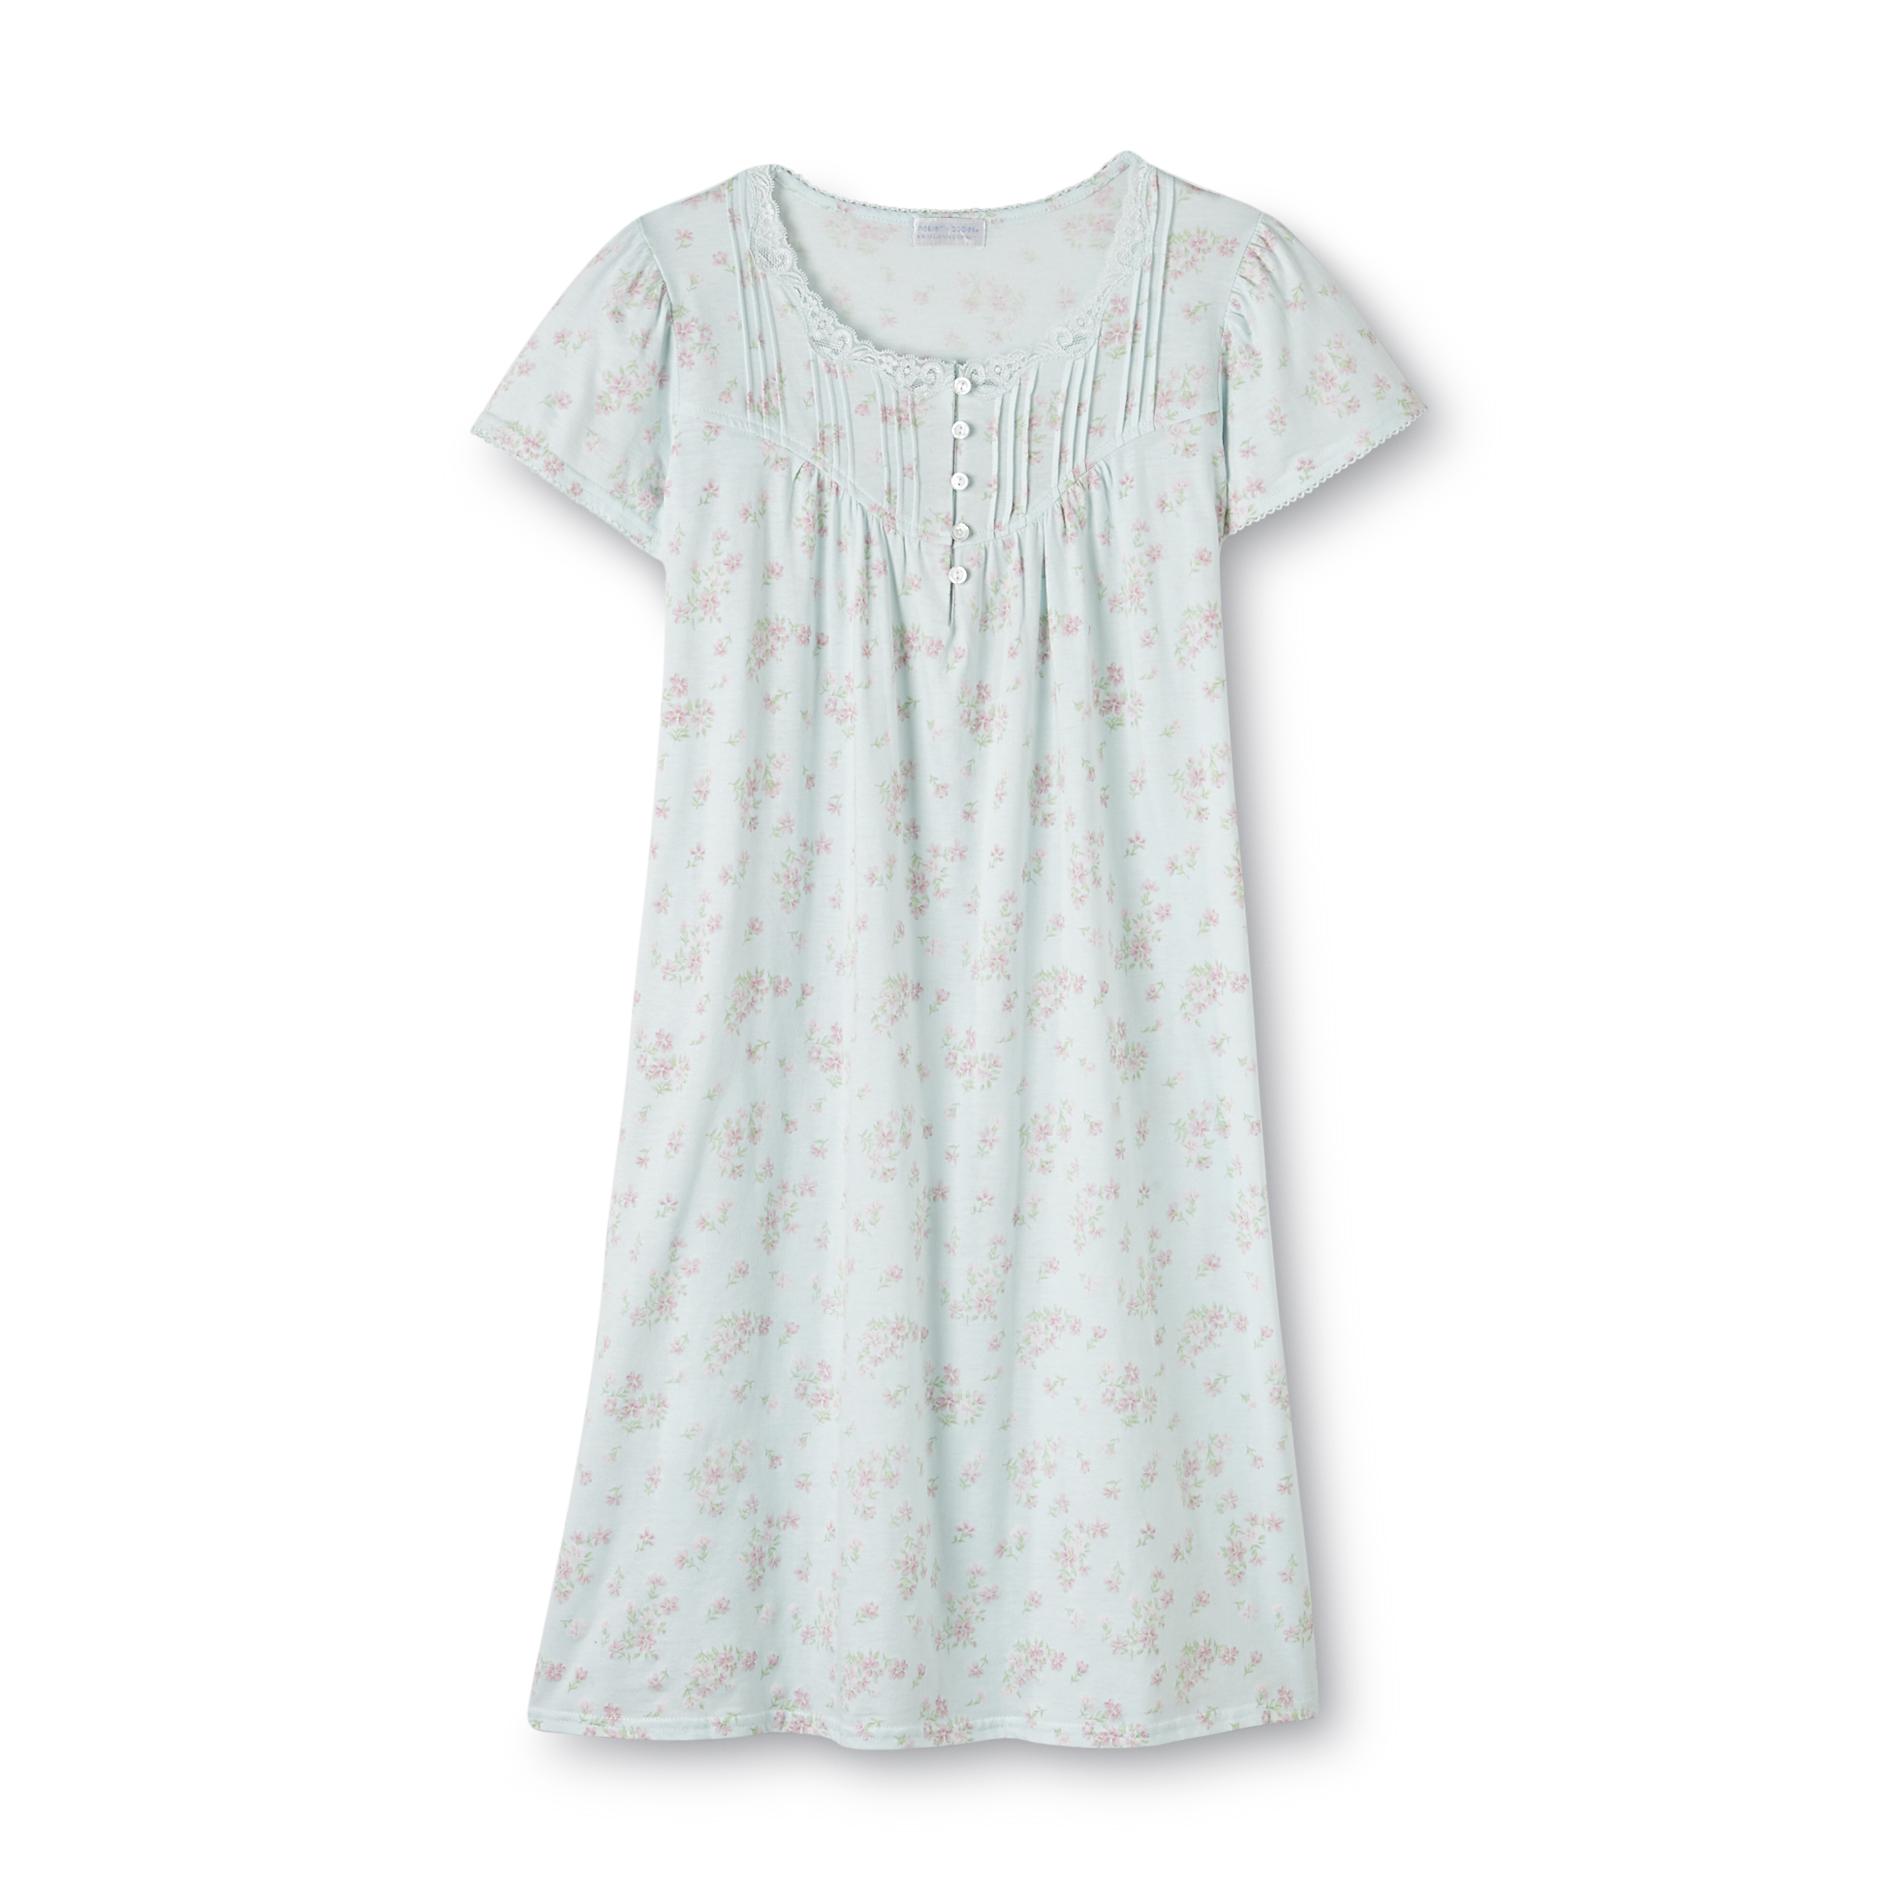 Heavenly Bodies by Miss Elaine Women's Nightgown - Floral Print